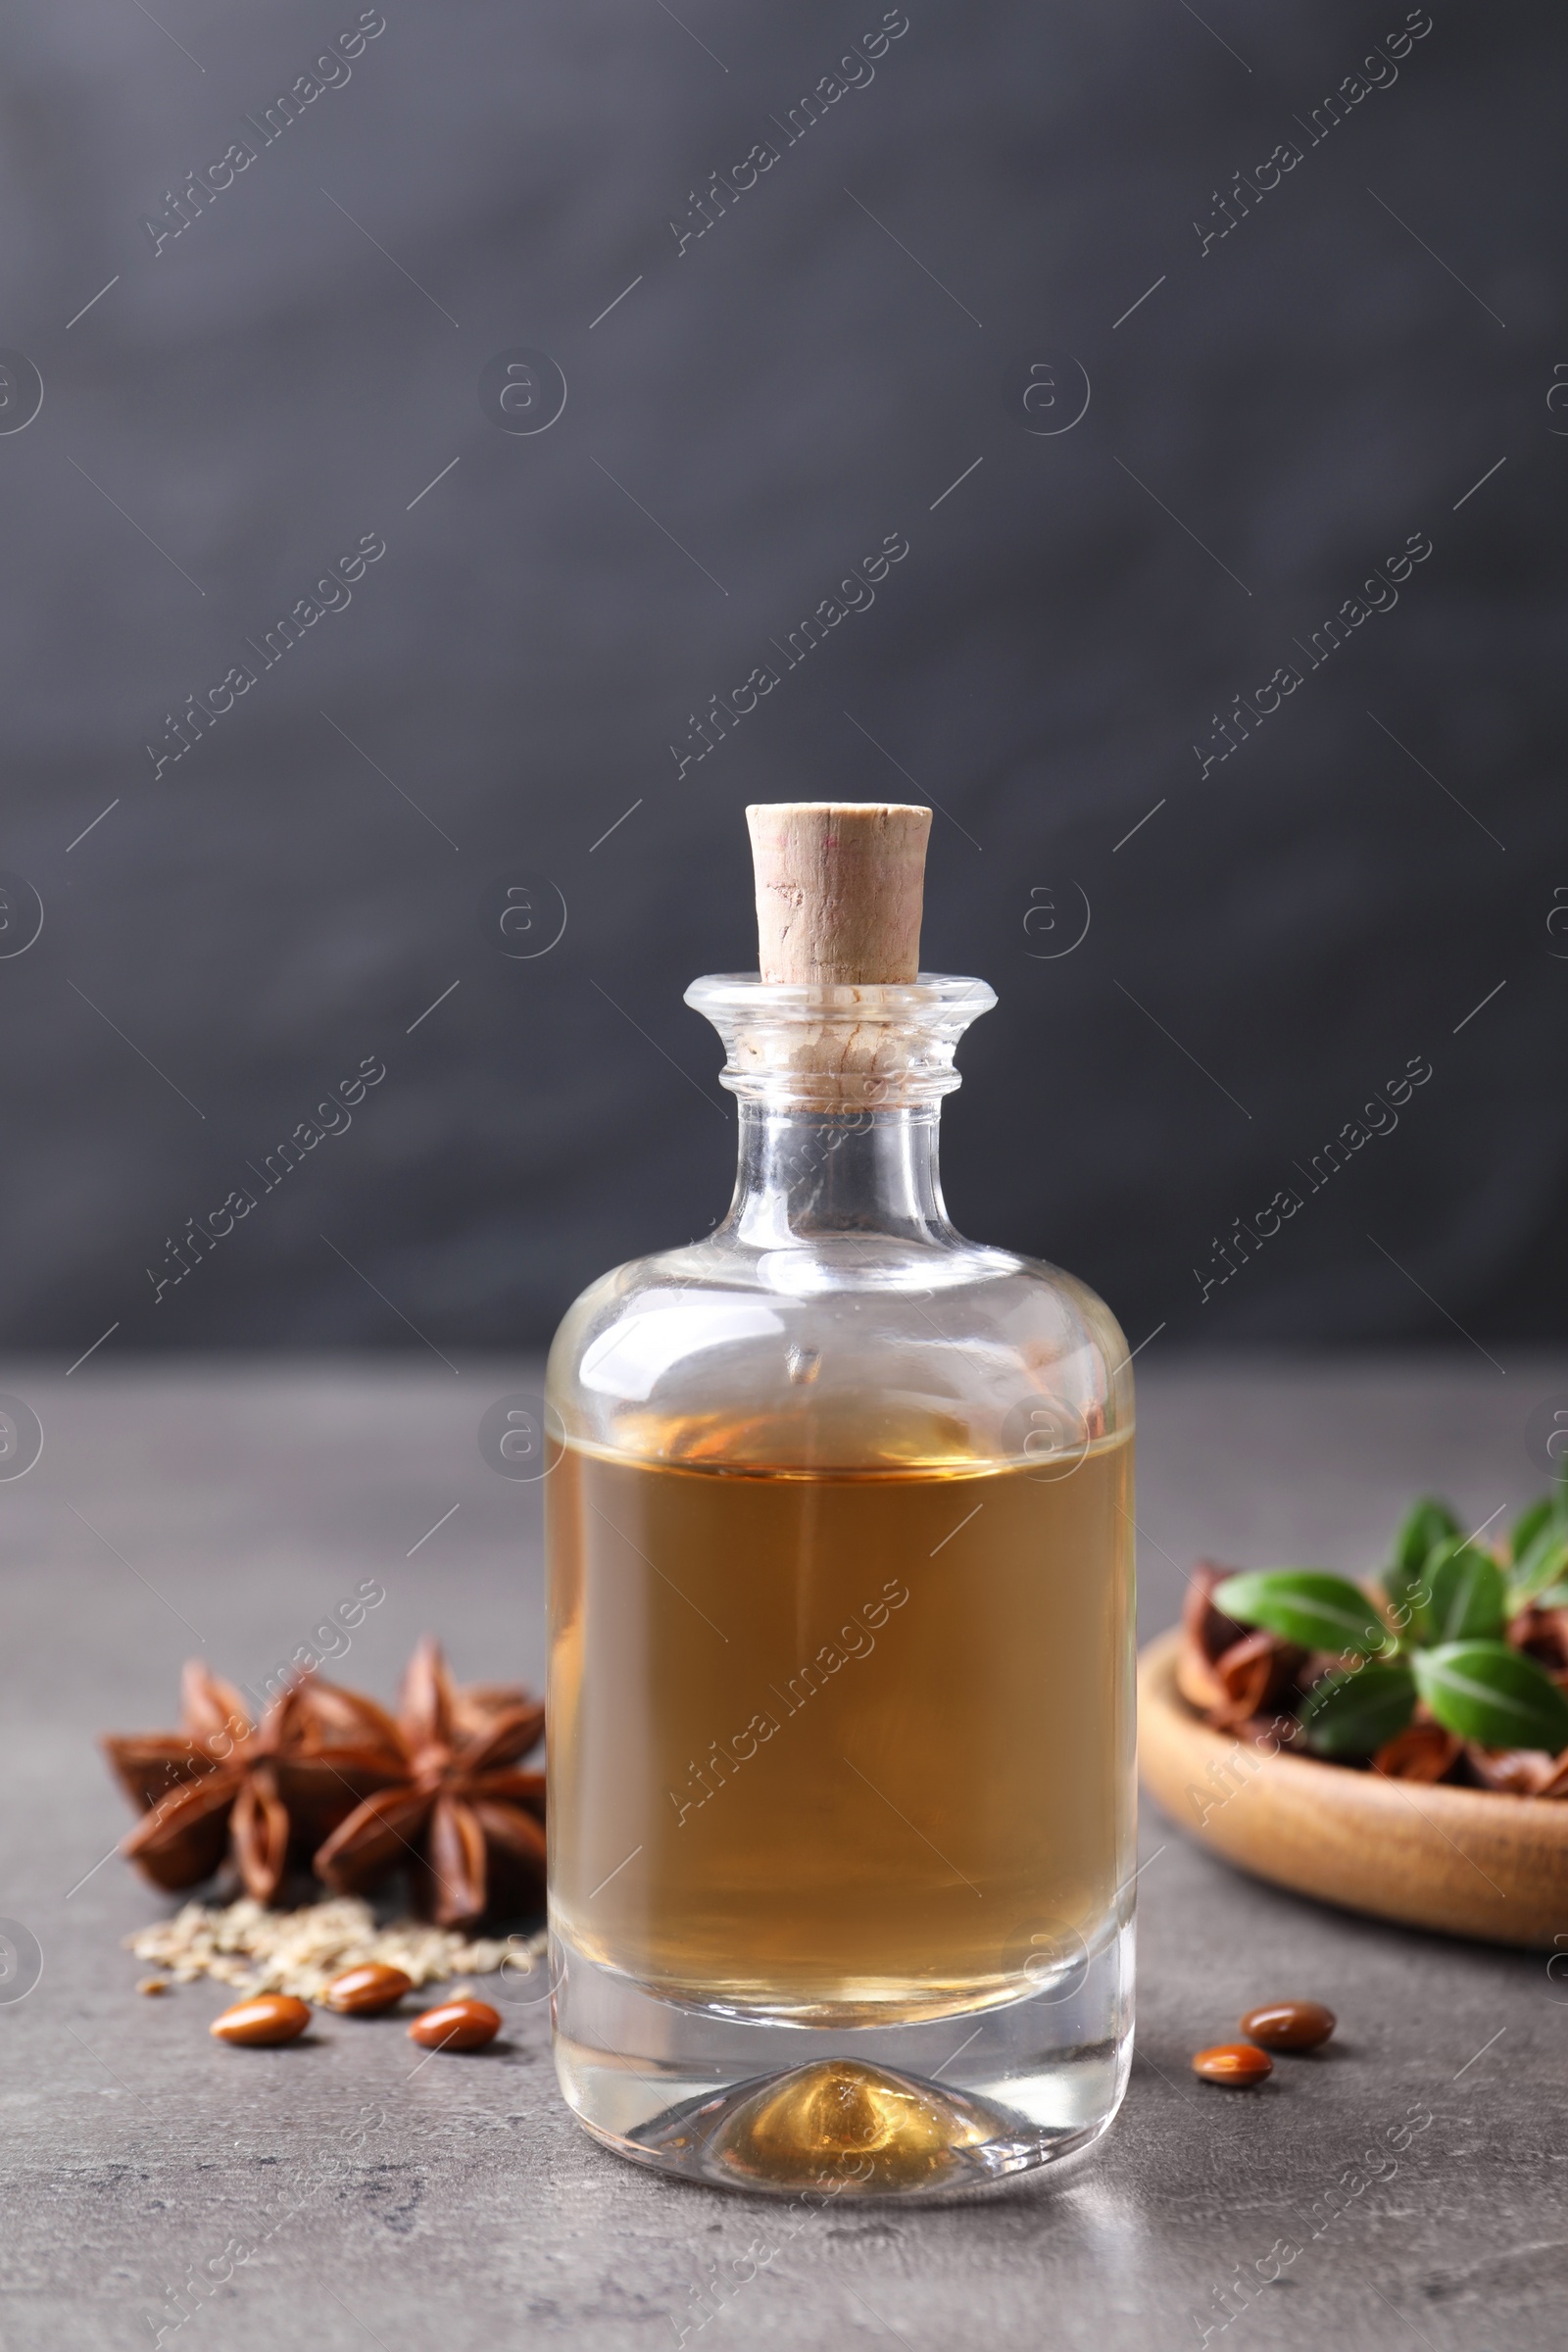 Photo of Anise essential oil and spices on grey table